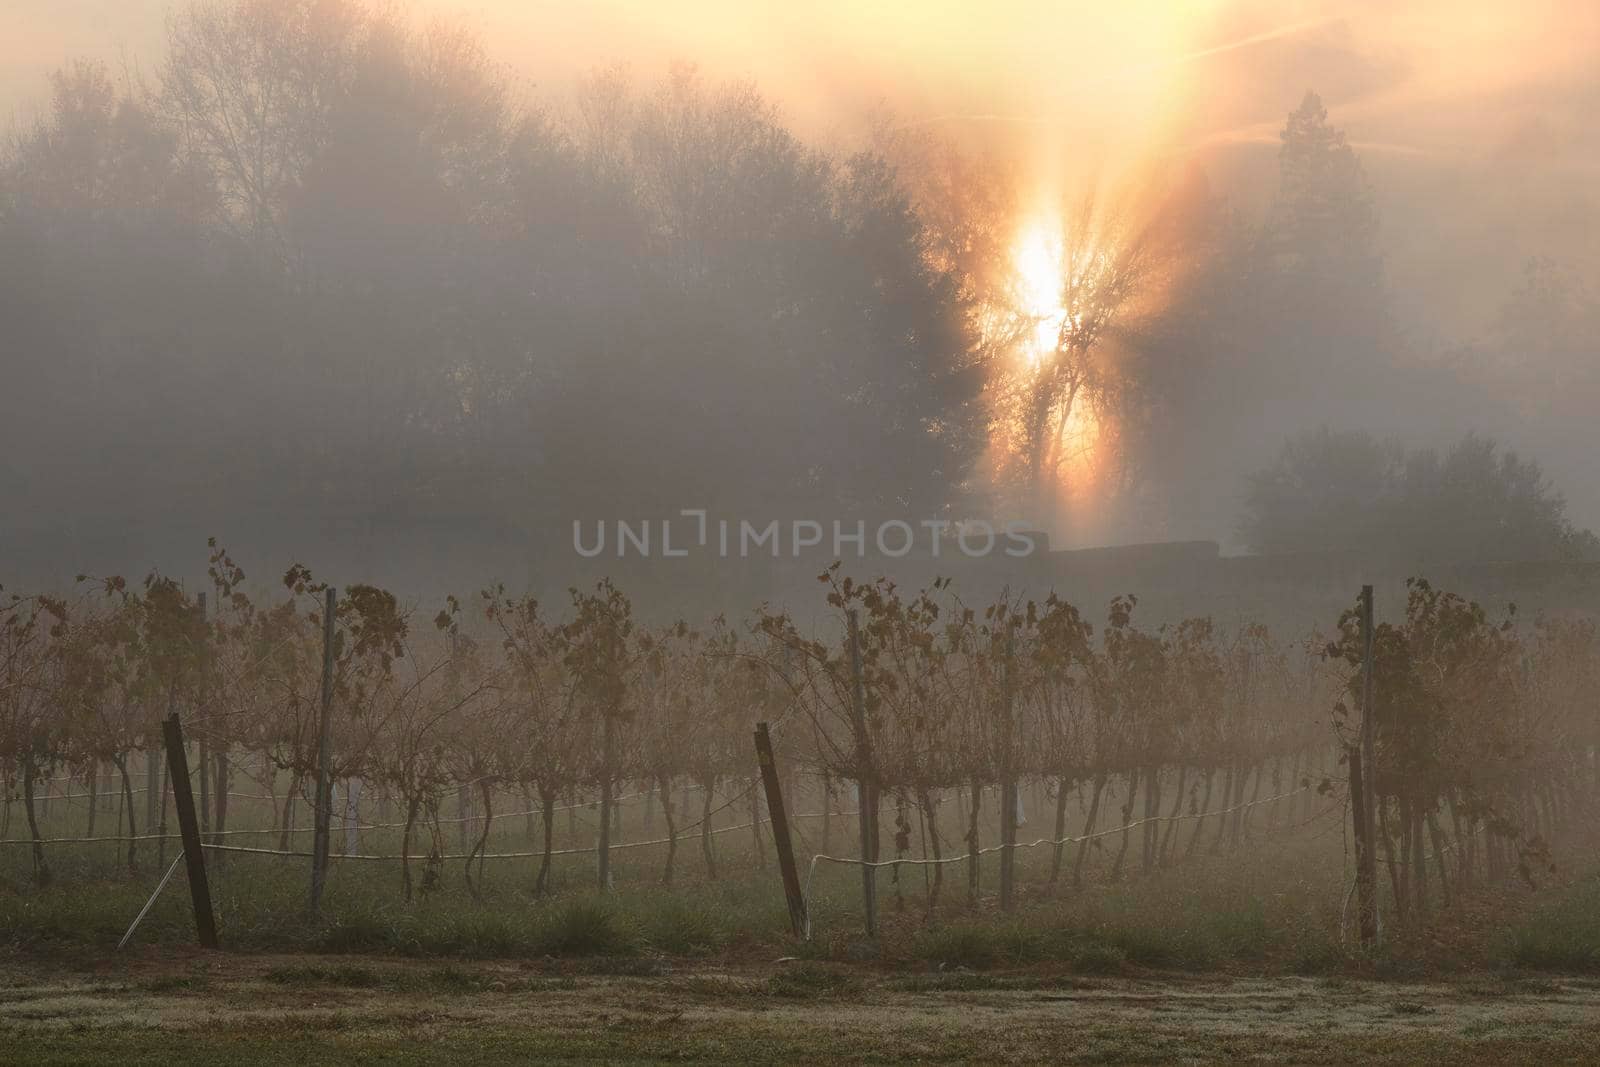 Foggy vineyard with some trees silhouette and the orange sunlight in the background in a misty morning